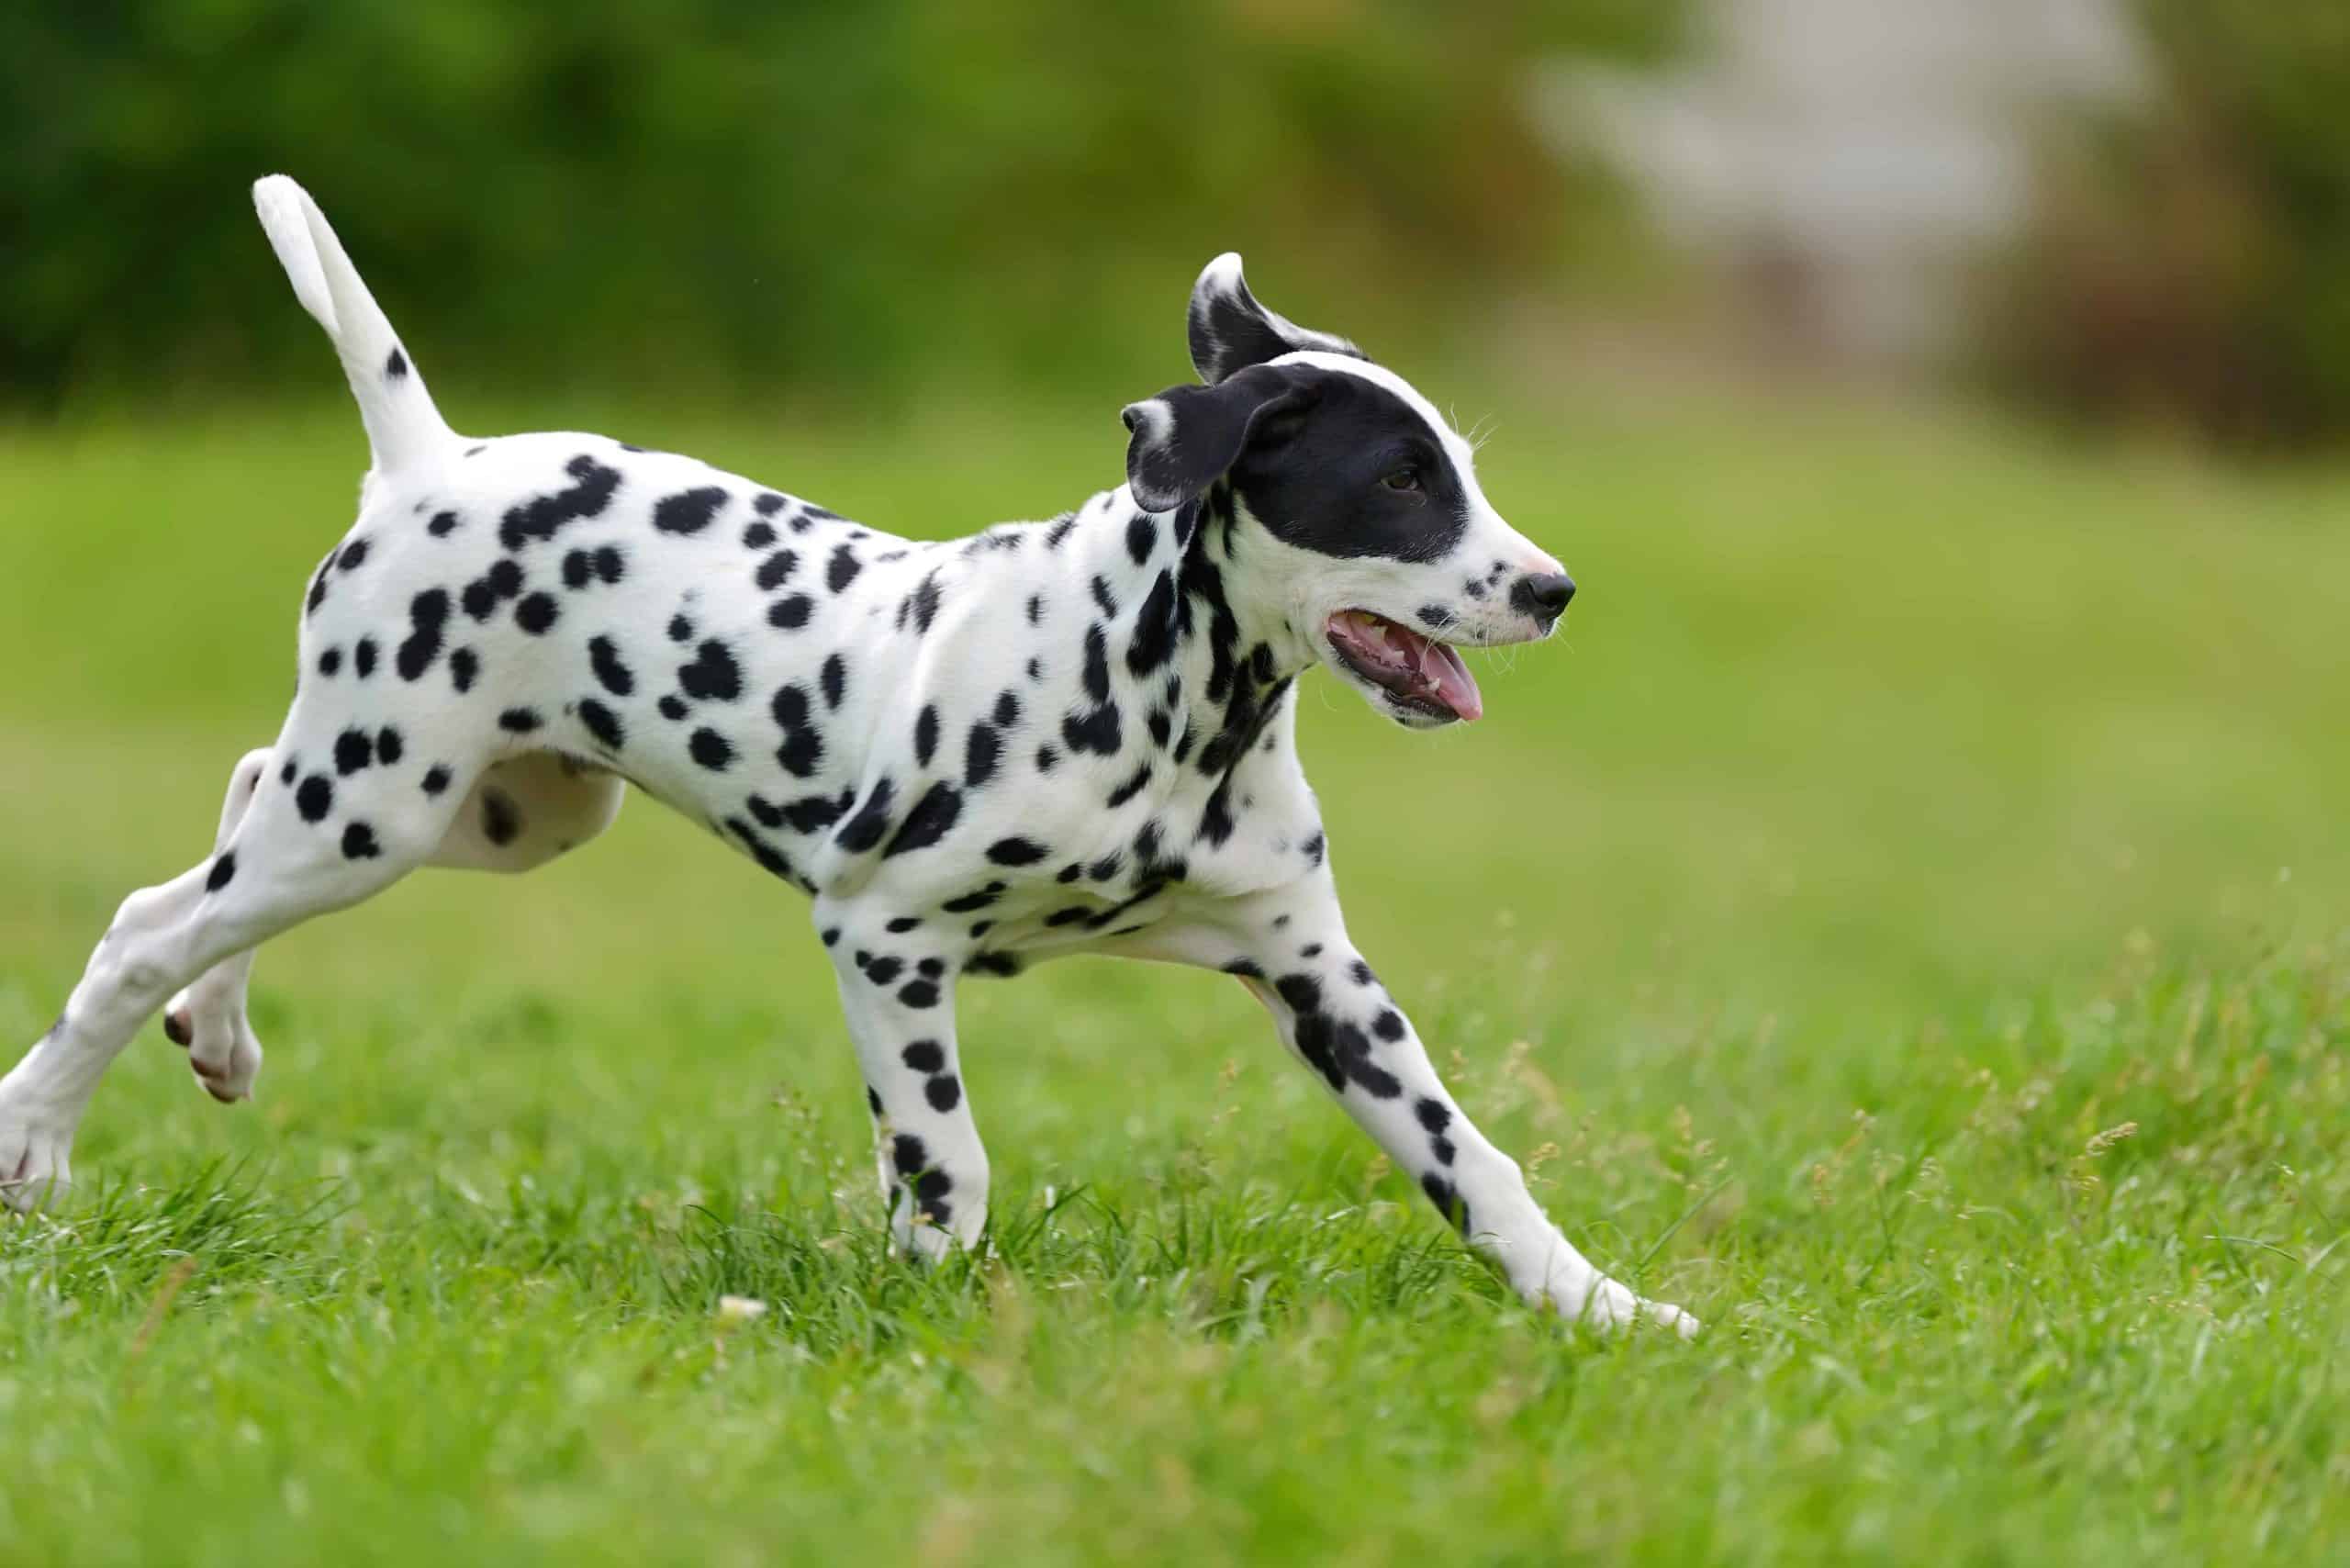 Dalmatian runs across yard. Active dogs like Dalmatians generally burn a lot of fat and require a nutritious diet with enough calories to sustain their body weight.